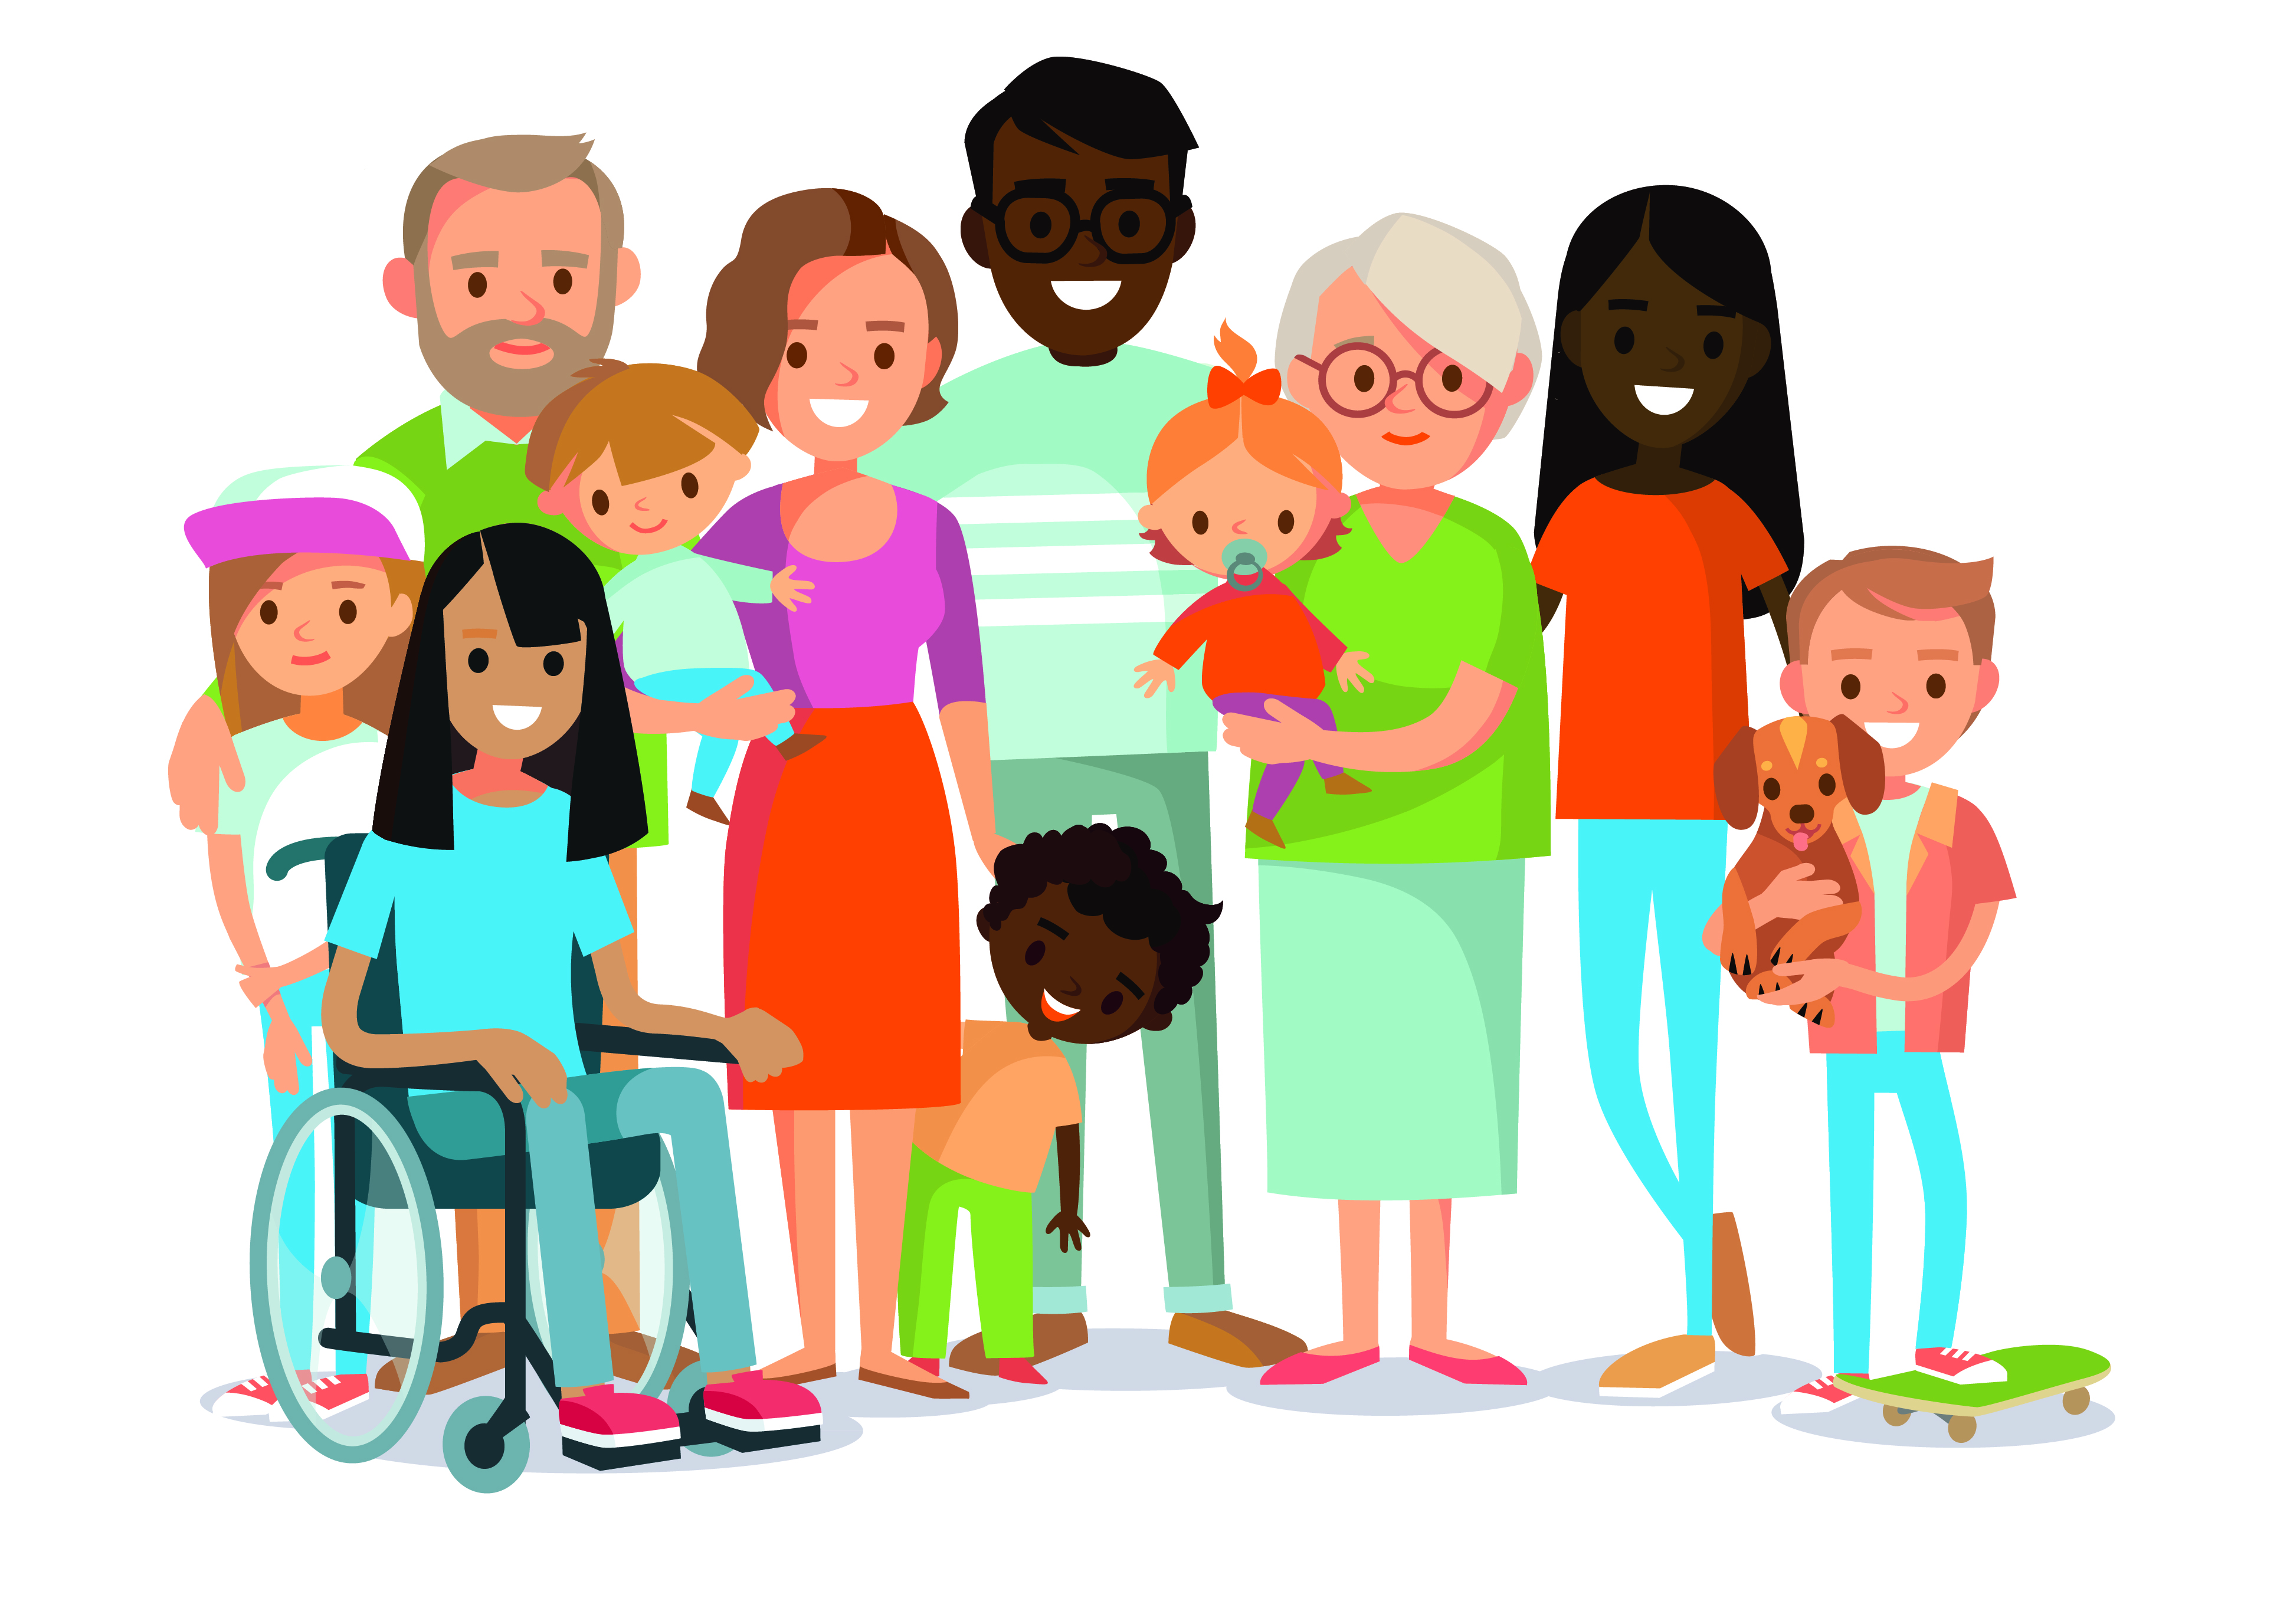 Illustration of a group of people representing a range of ages and abilities.